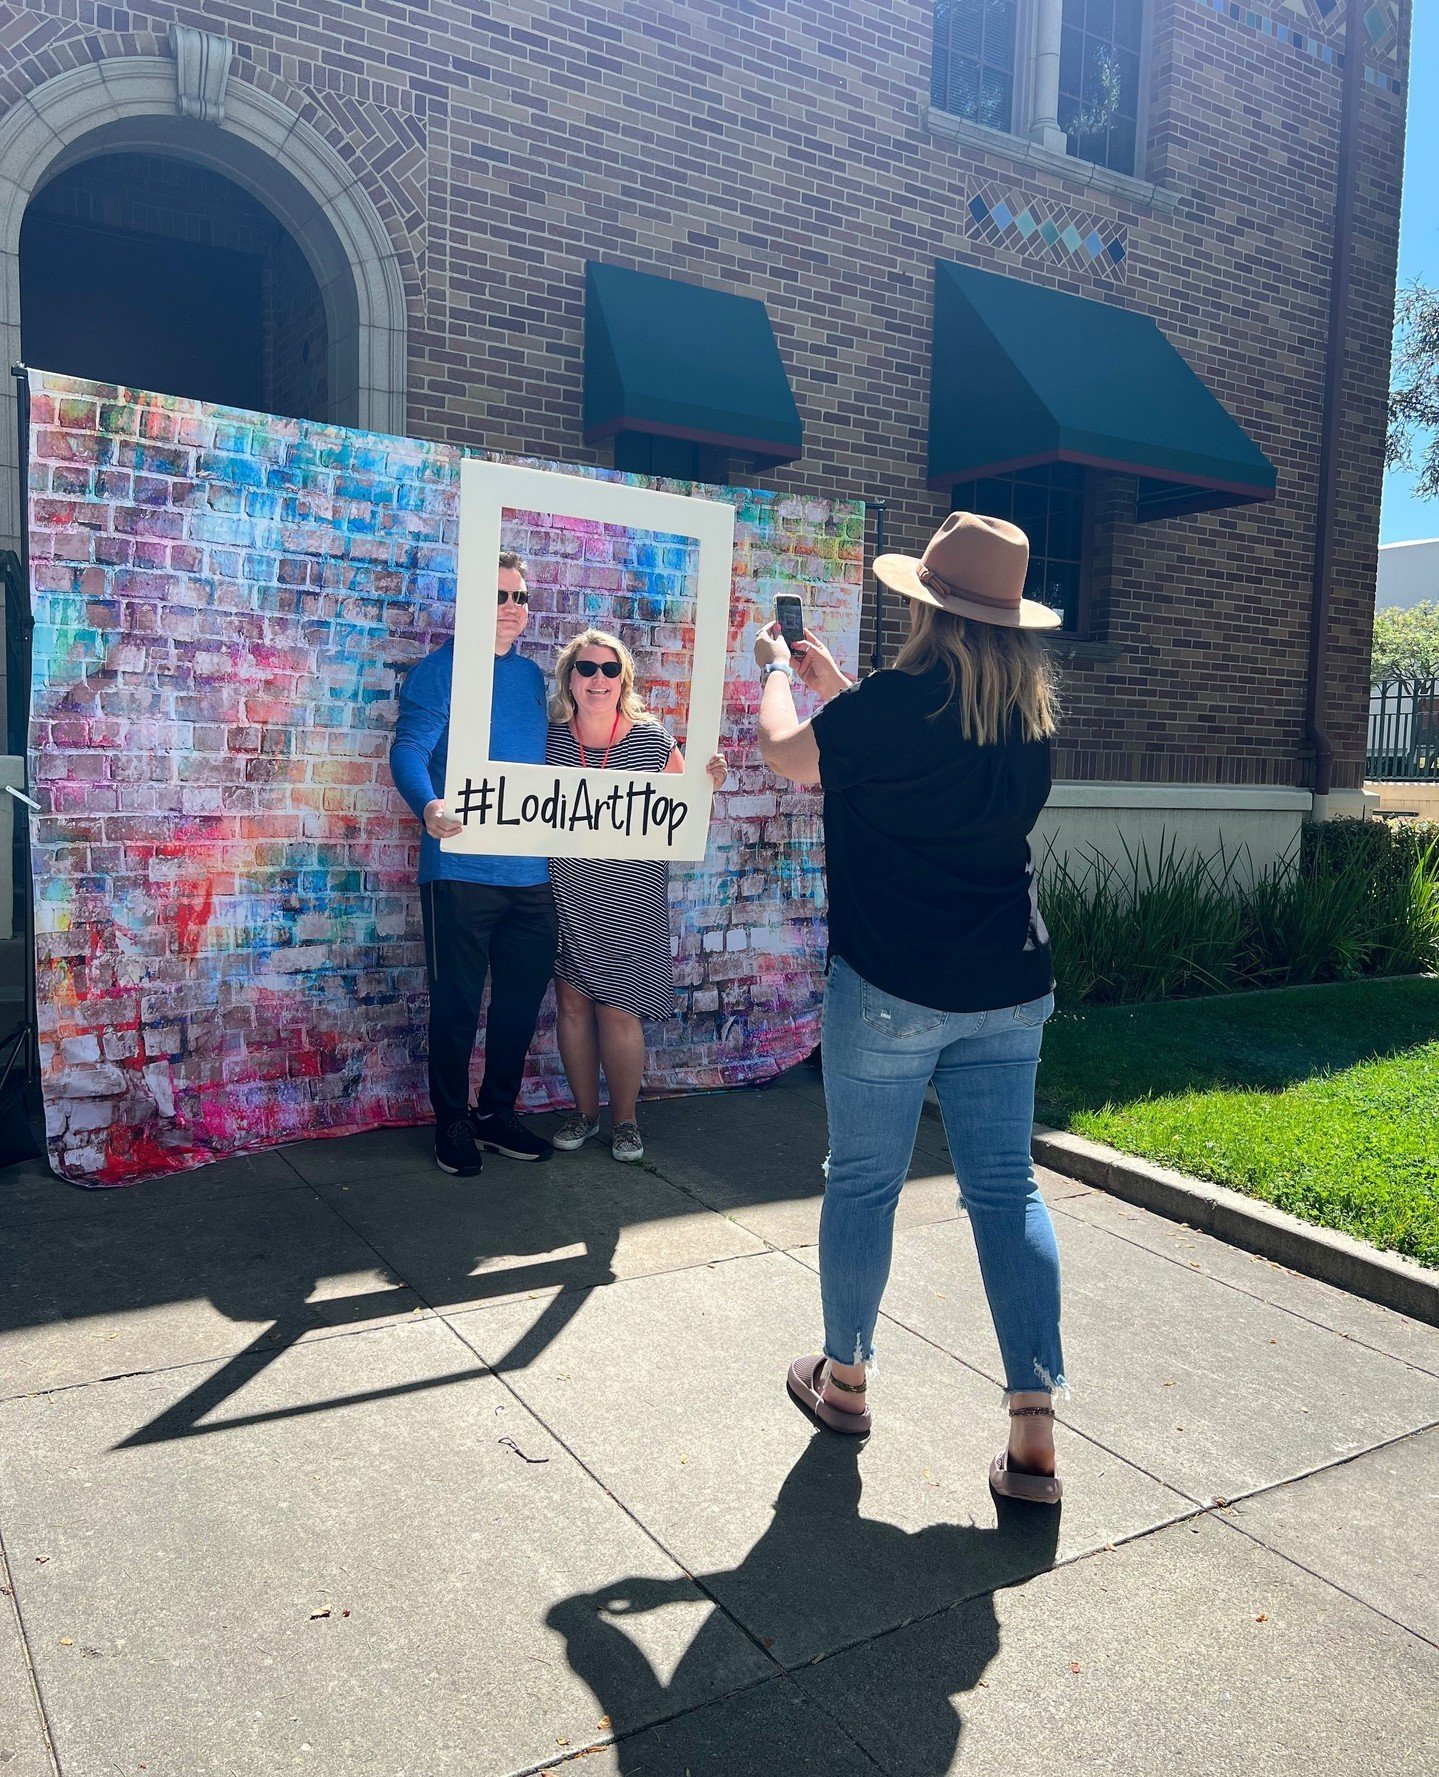 Lodi Art Hop is back on Saturday, April 20th from 10a-2p in @downtownlodi!⁠ 🥰⁠
⁠
The Lodi Art Hop is a quarterly celebration of the arts with live music, local artists, art-making for all ages, &amp; more! Presented by the Lodi Arts Foundation (that